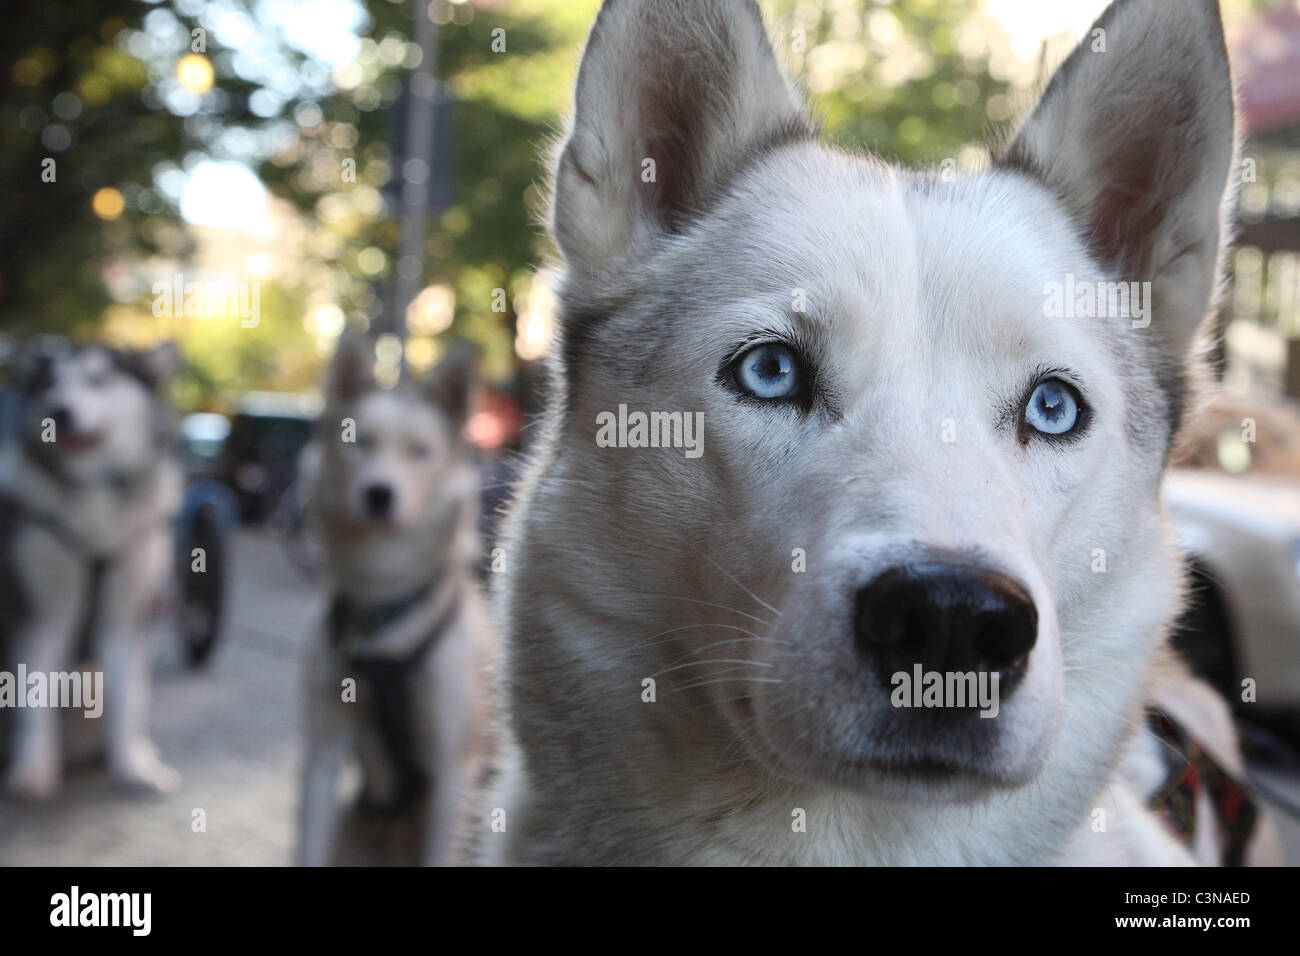 Huskies waiting for customers for a sightseeing tour, Berlin, Germany Stock Photo